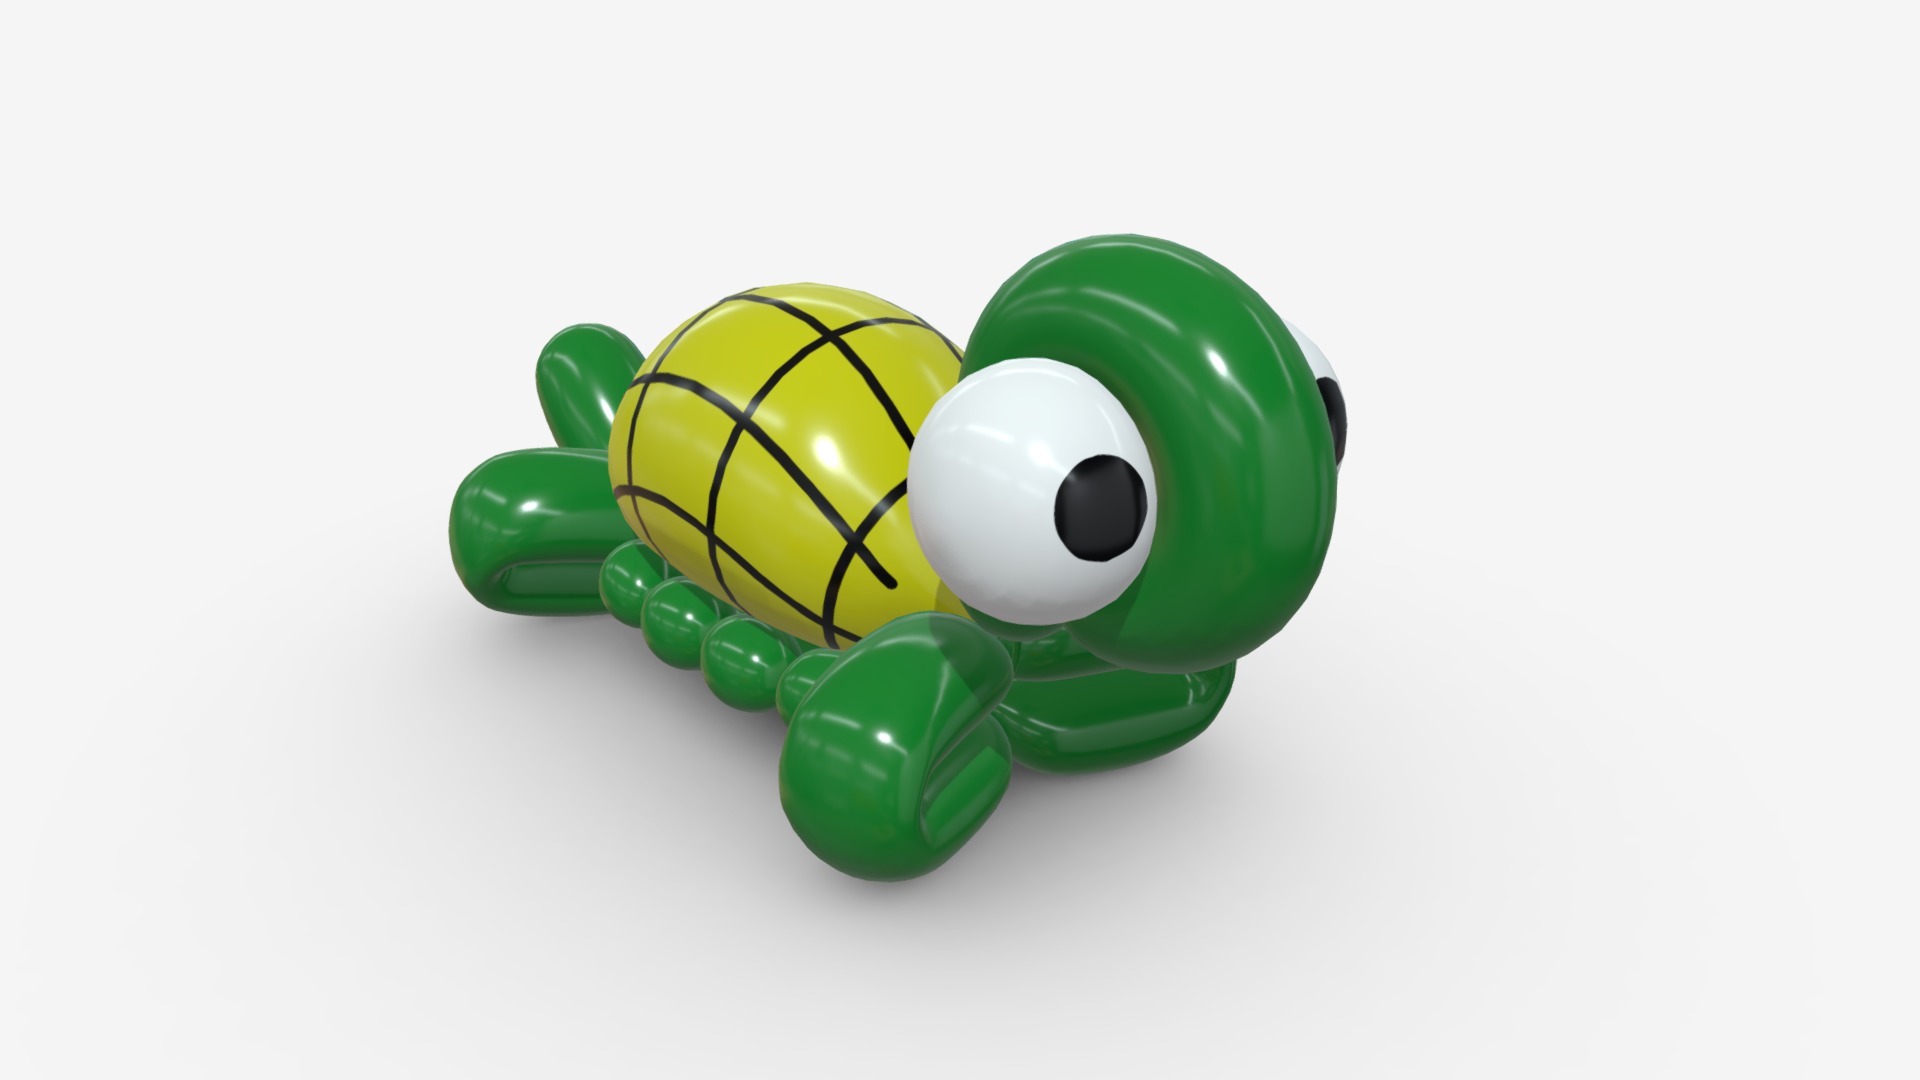 3D model balloon turtle - This is a 3D model of the balloon turtle. The 3D model is about a green and yellow toy.